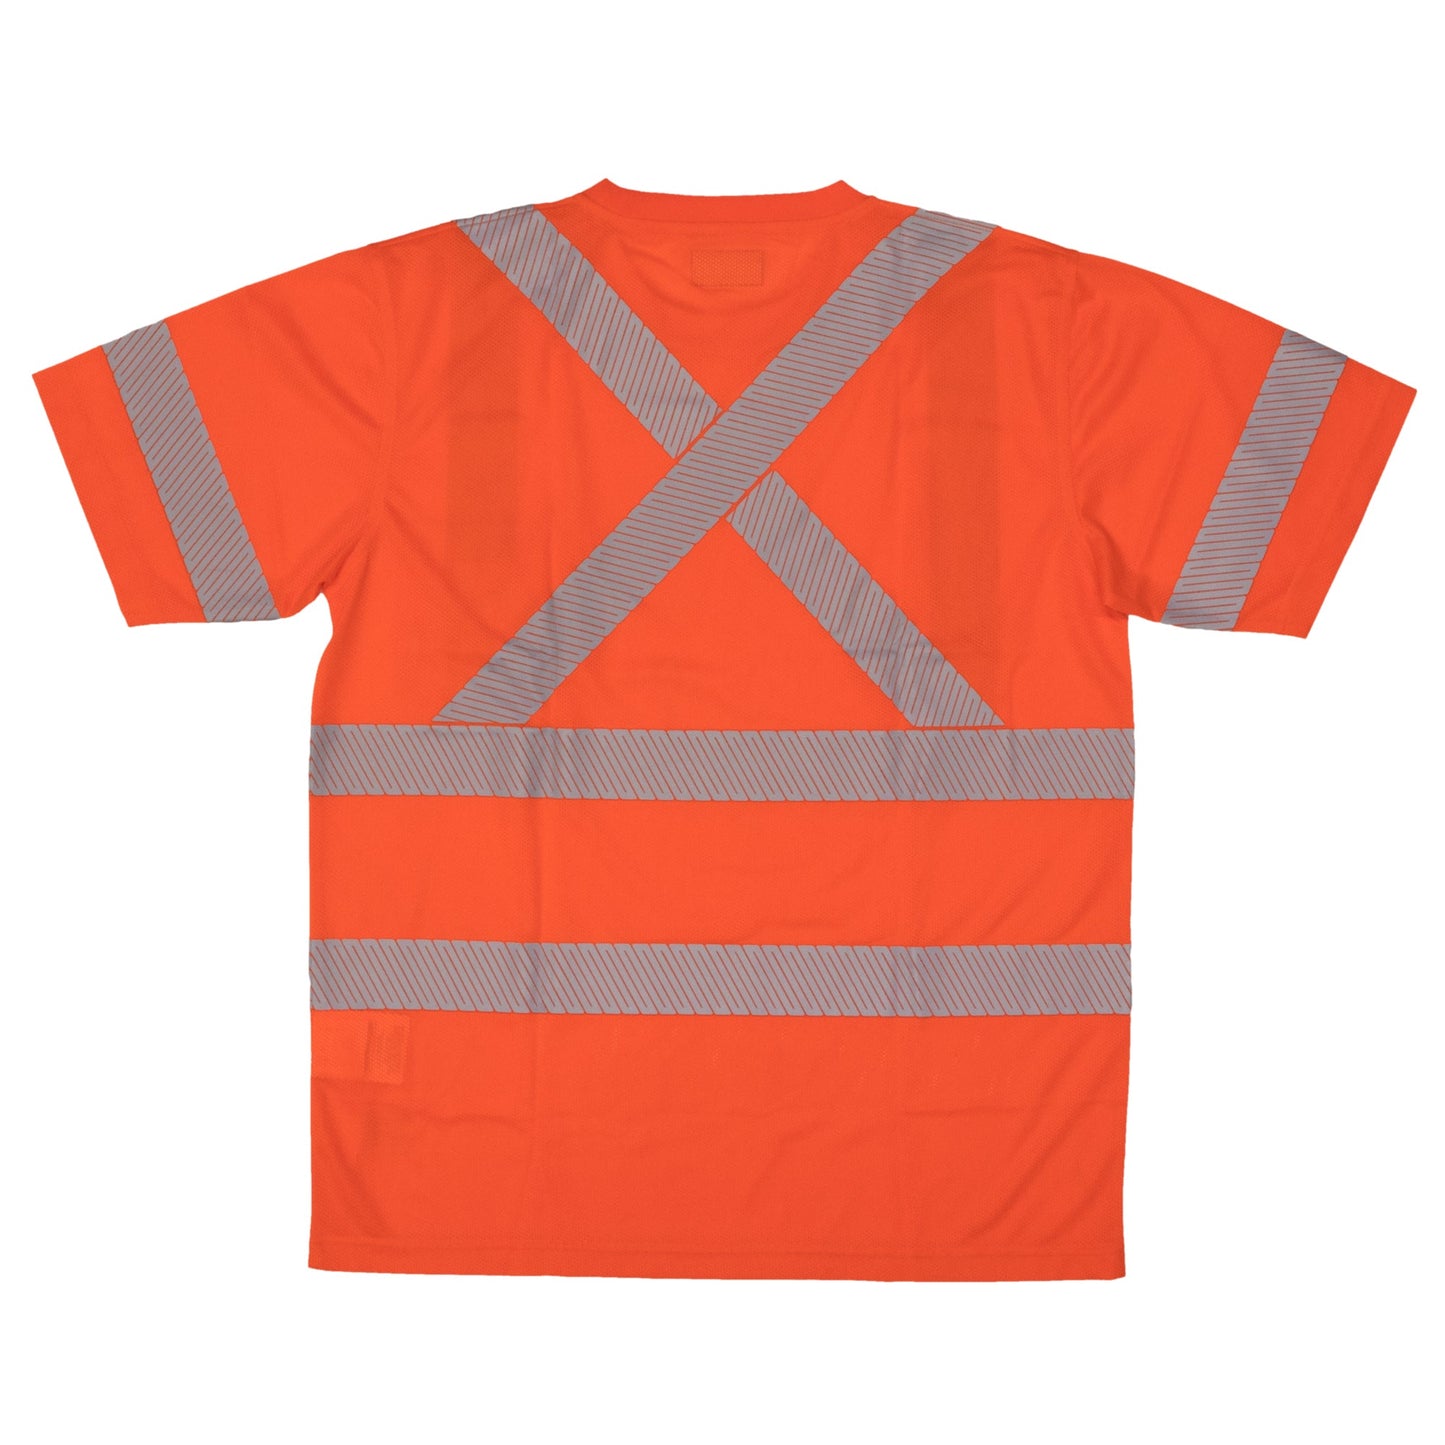 ST07 S/S Safety T-Shirt with Segmented Stripes